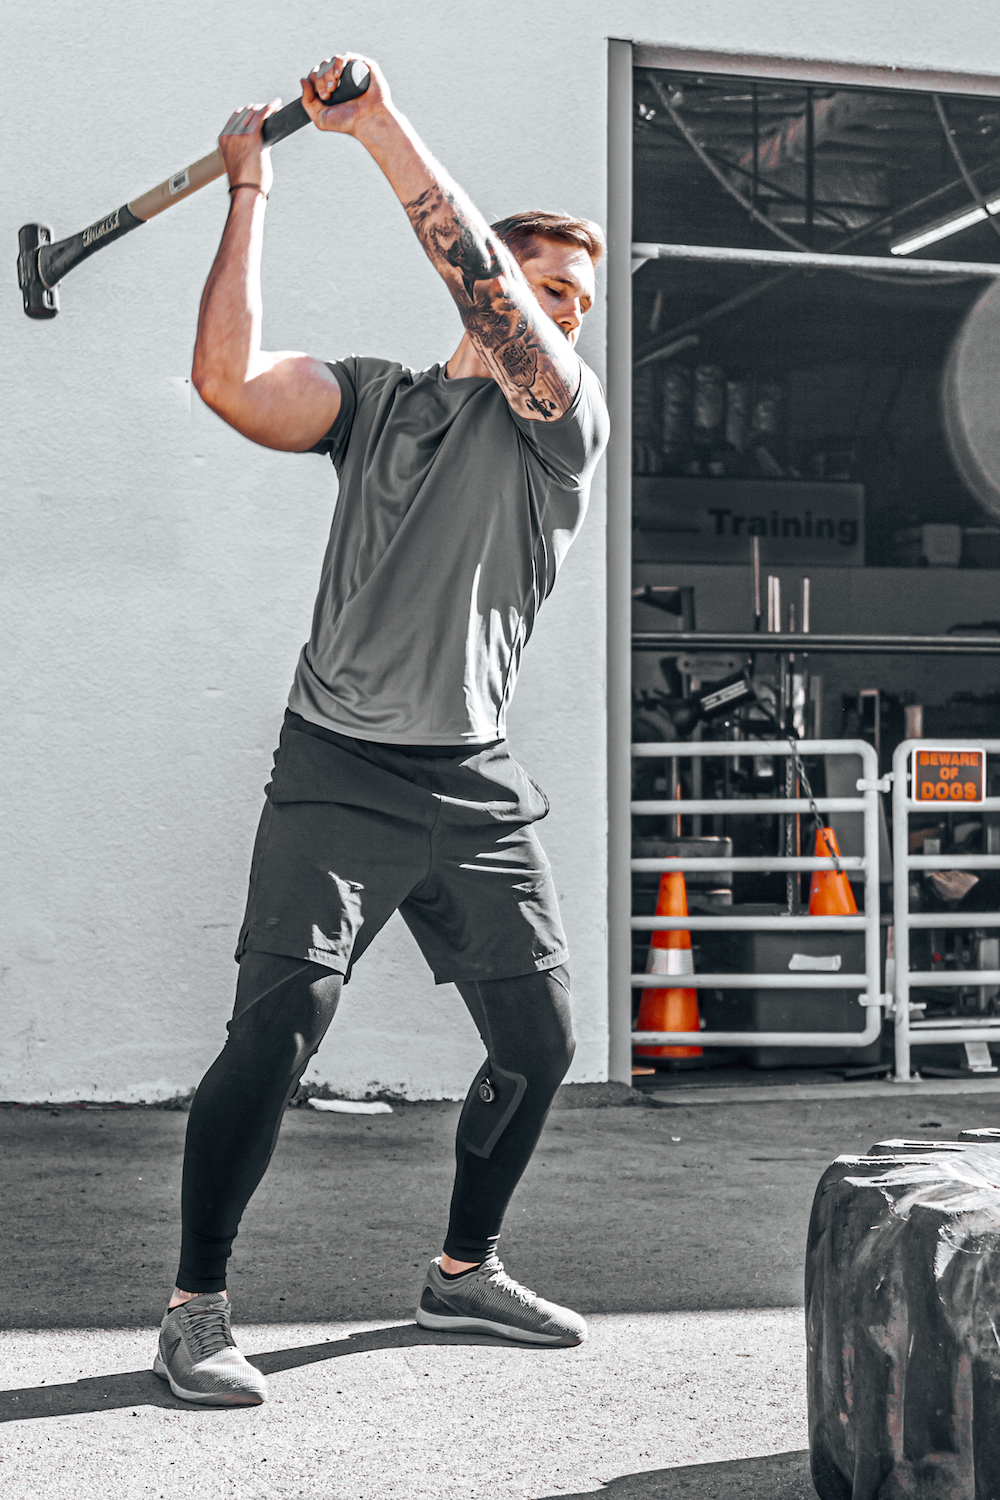 San Diego company Tighties Activewear featuring a man wearing athletic apparel swinging a sledgehammer at a gym